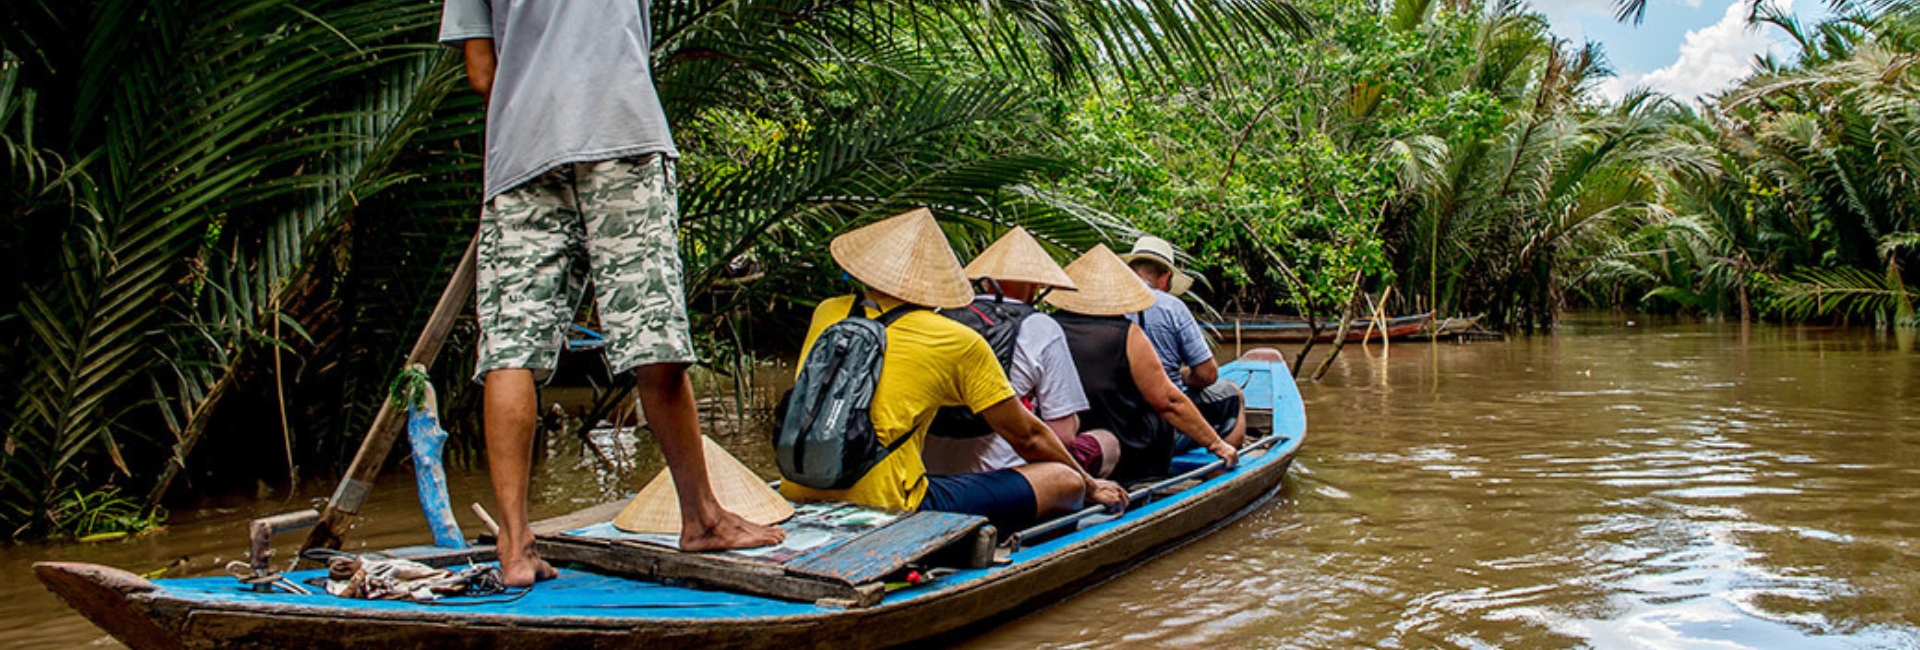 Vietnam in 4 days: What to see & Suggested Itineraries